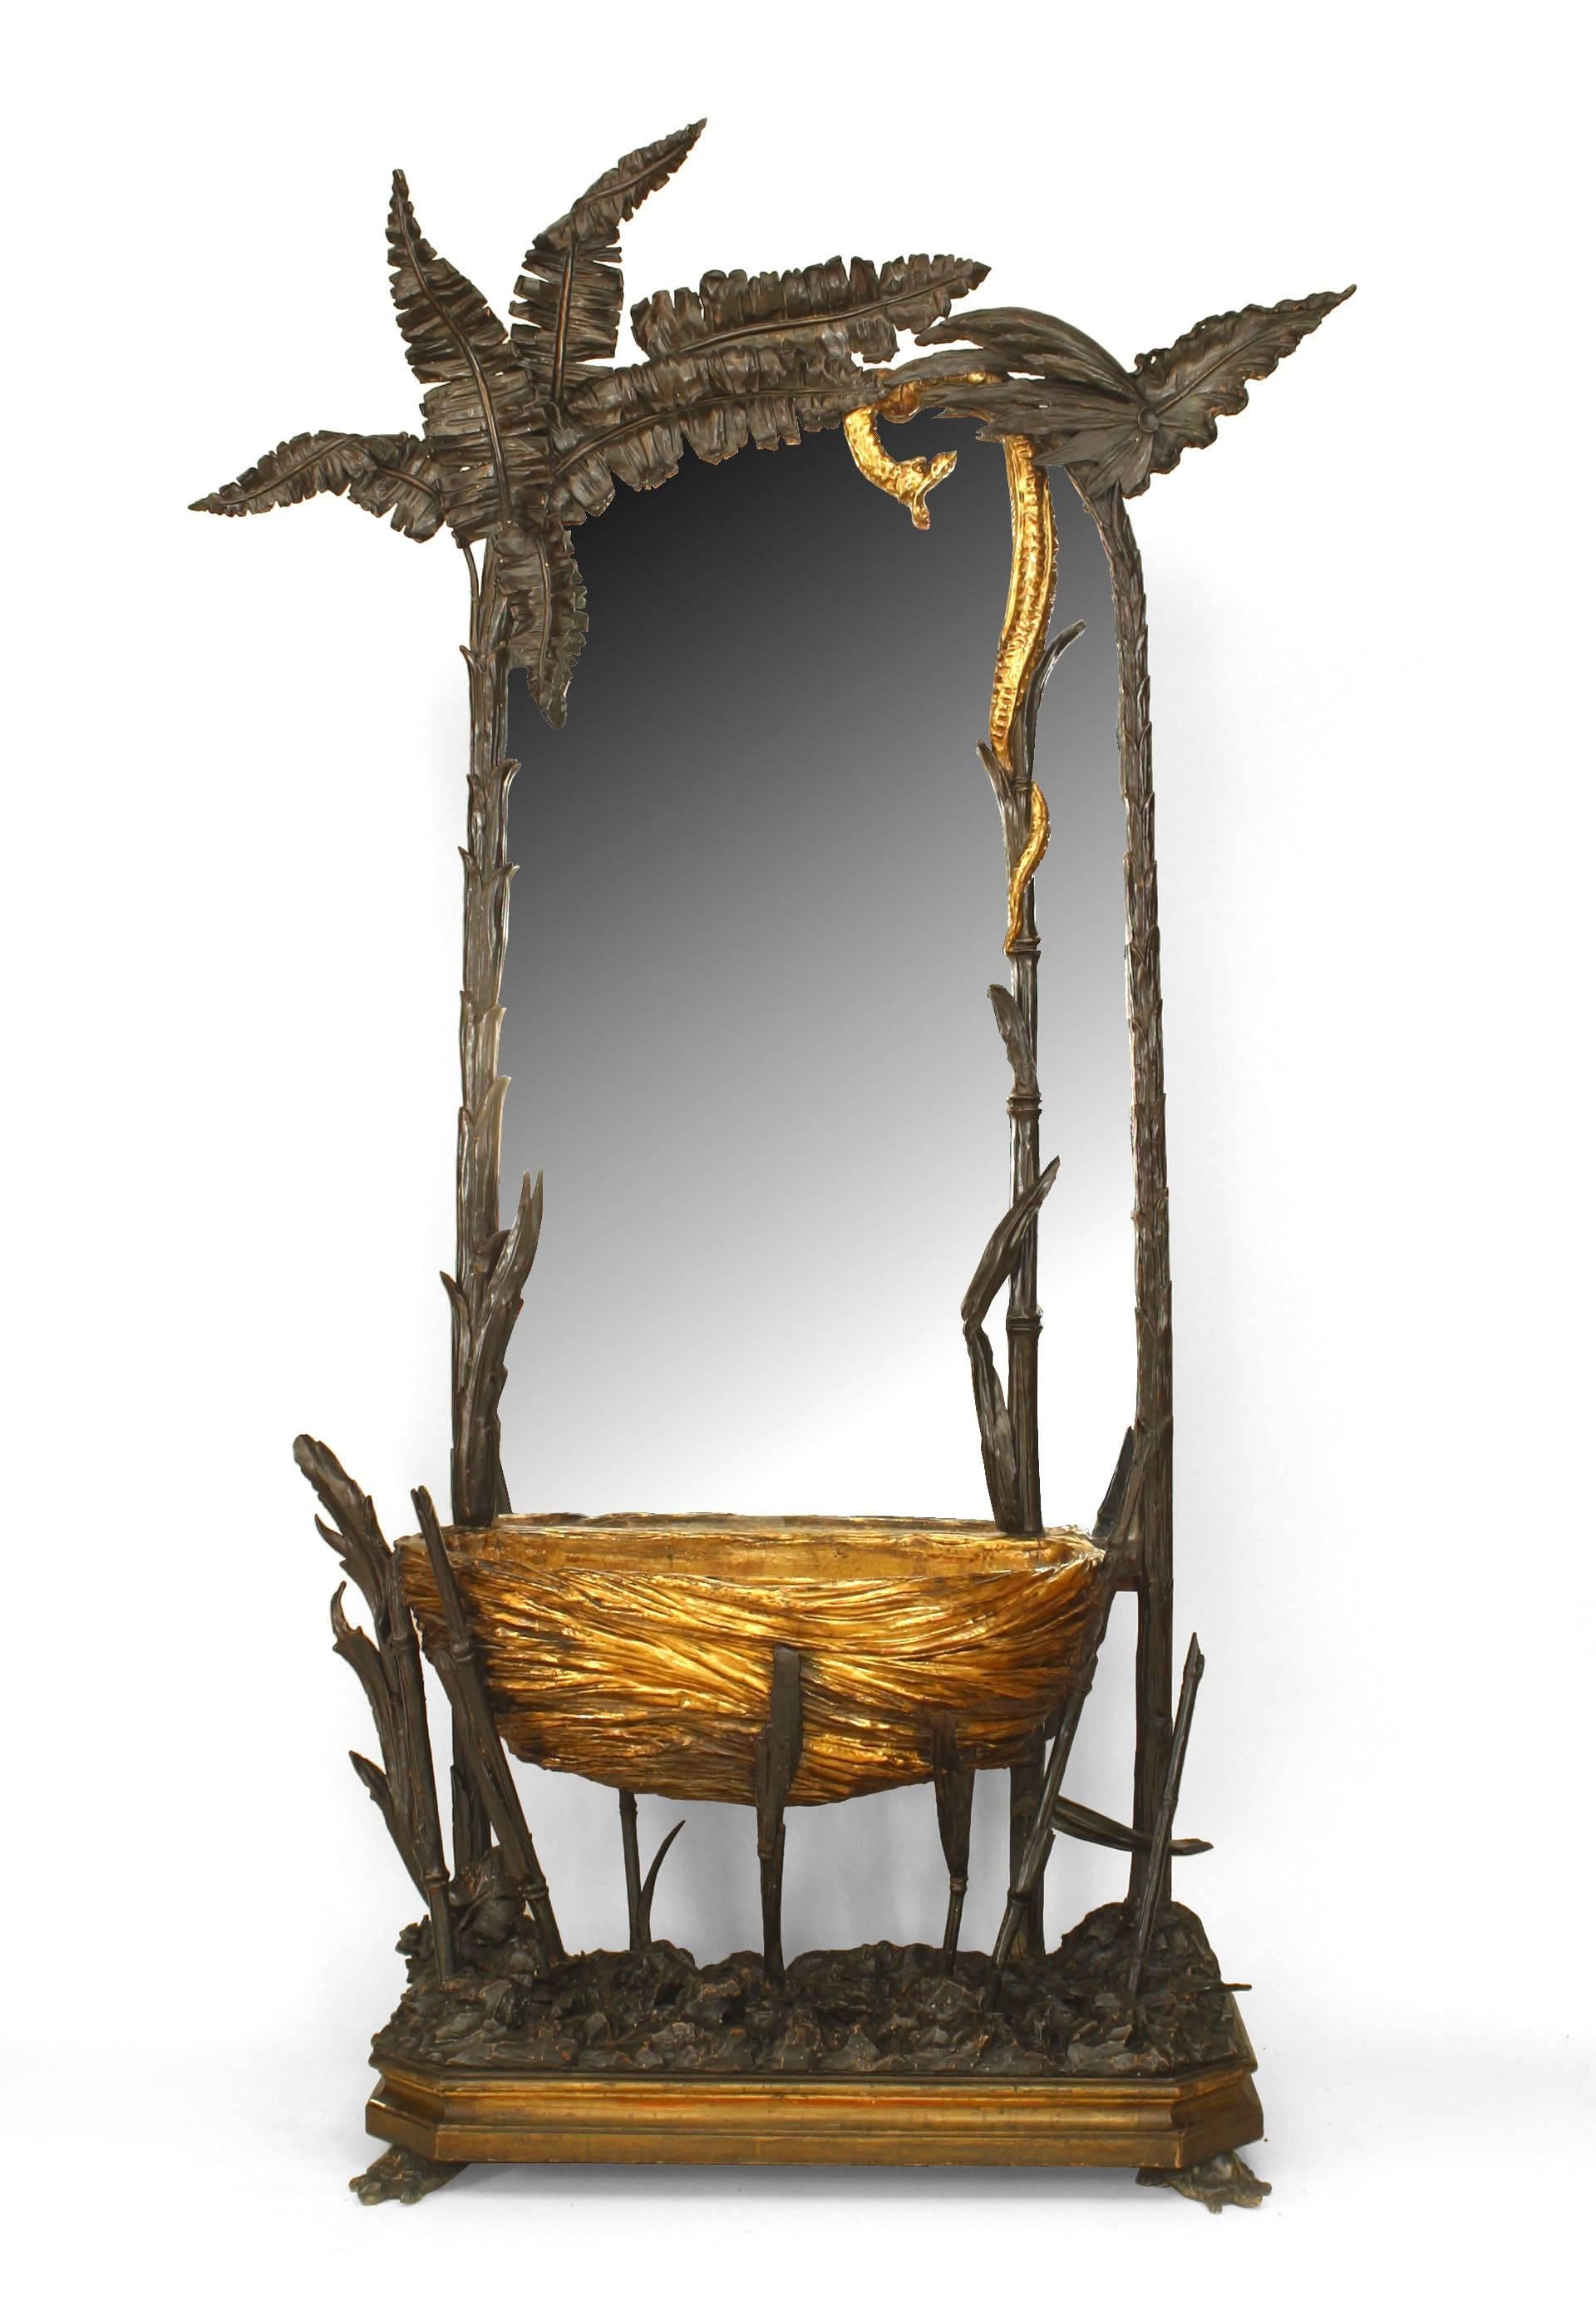 French (Napoleon III) naturalistic cheval mirror with a carved palm and fern design frame with a gilt snake and a carved gilt bird's nest planter basket on turtle feet.
 